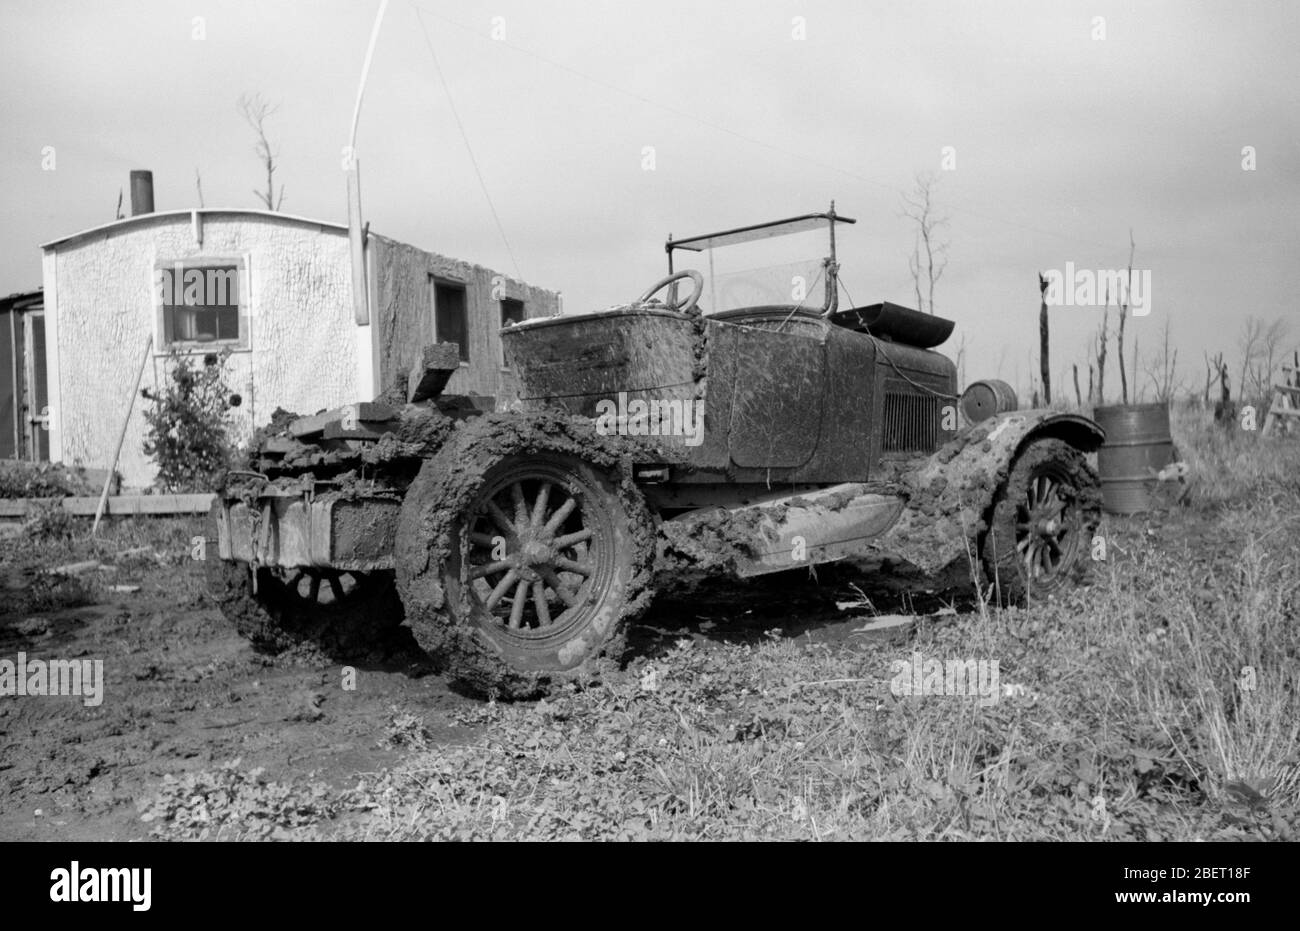 An early rat rod or chopped car on a day after mudding in the fields. Stock Photo